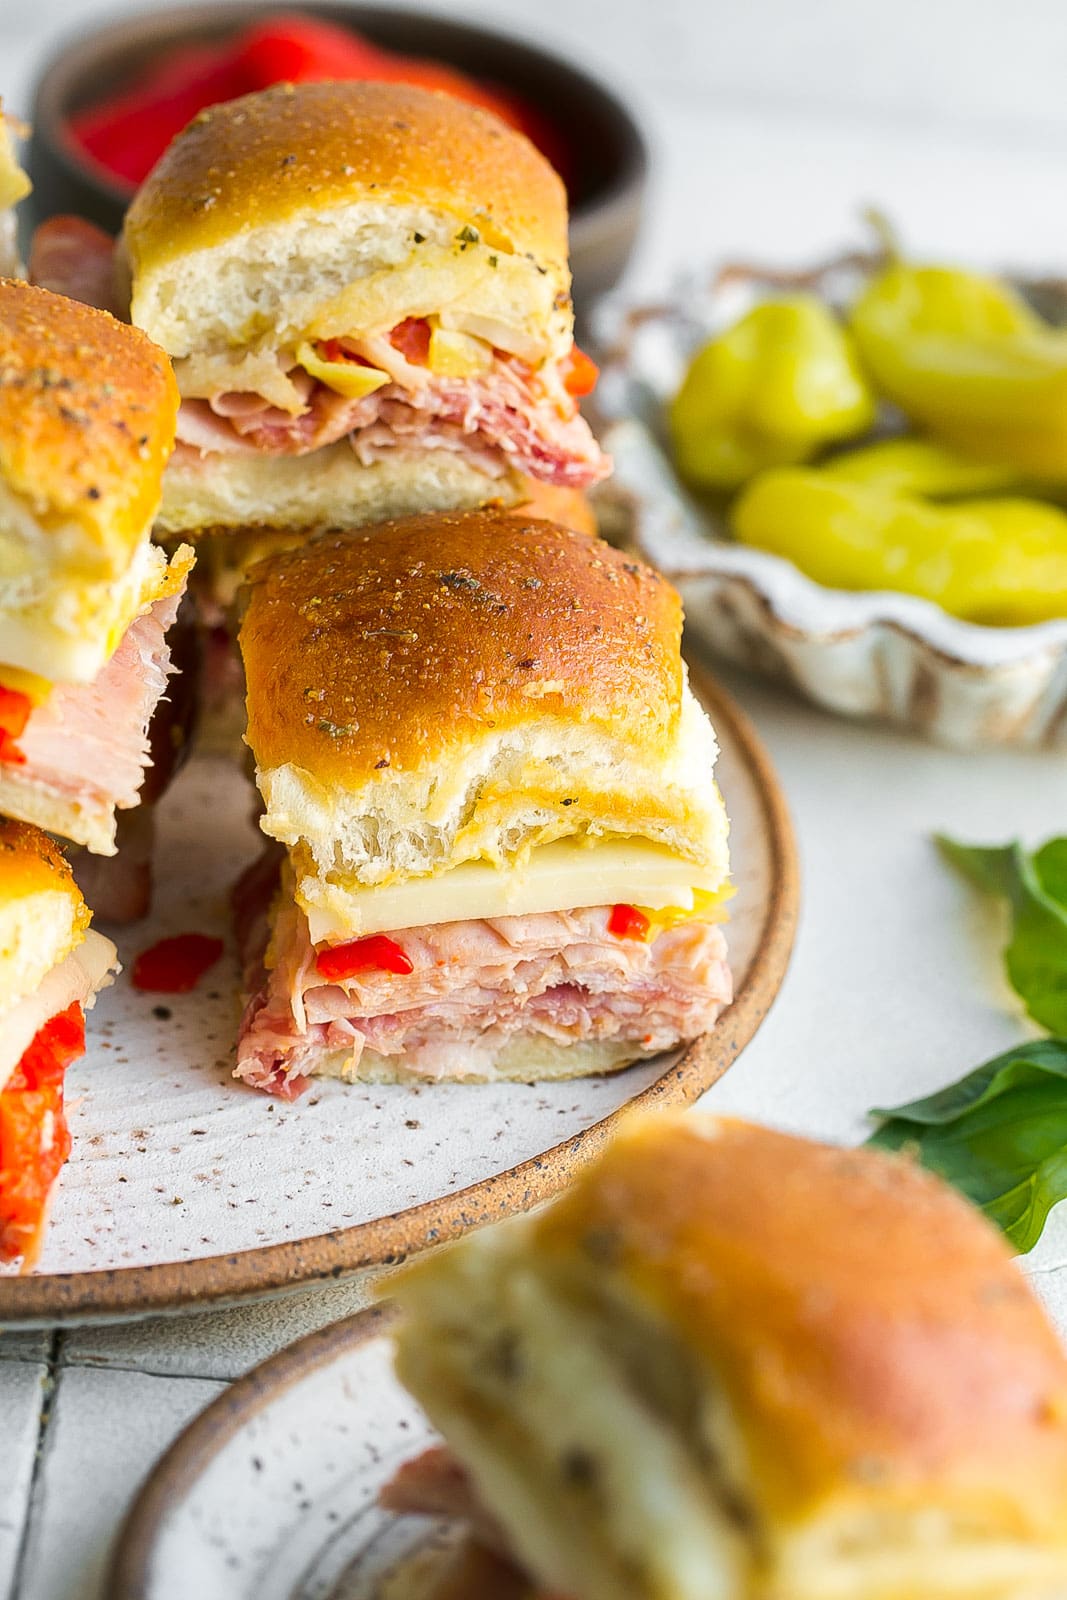 Italian meats and cheese sliders. 